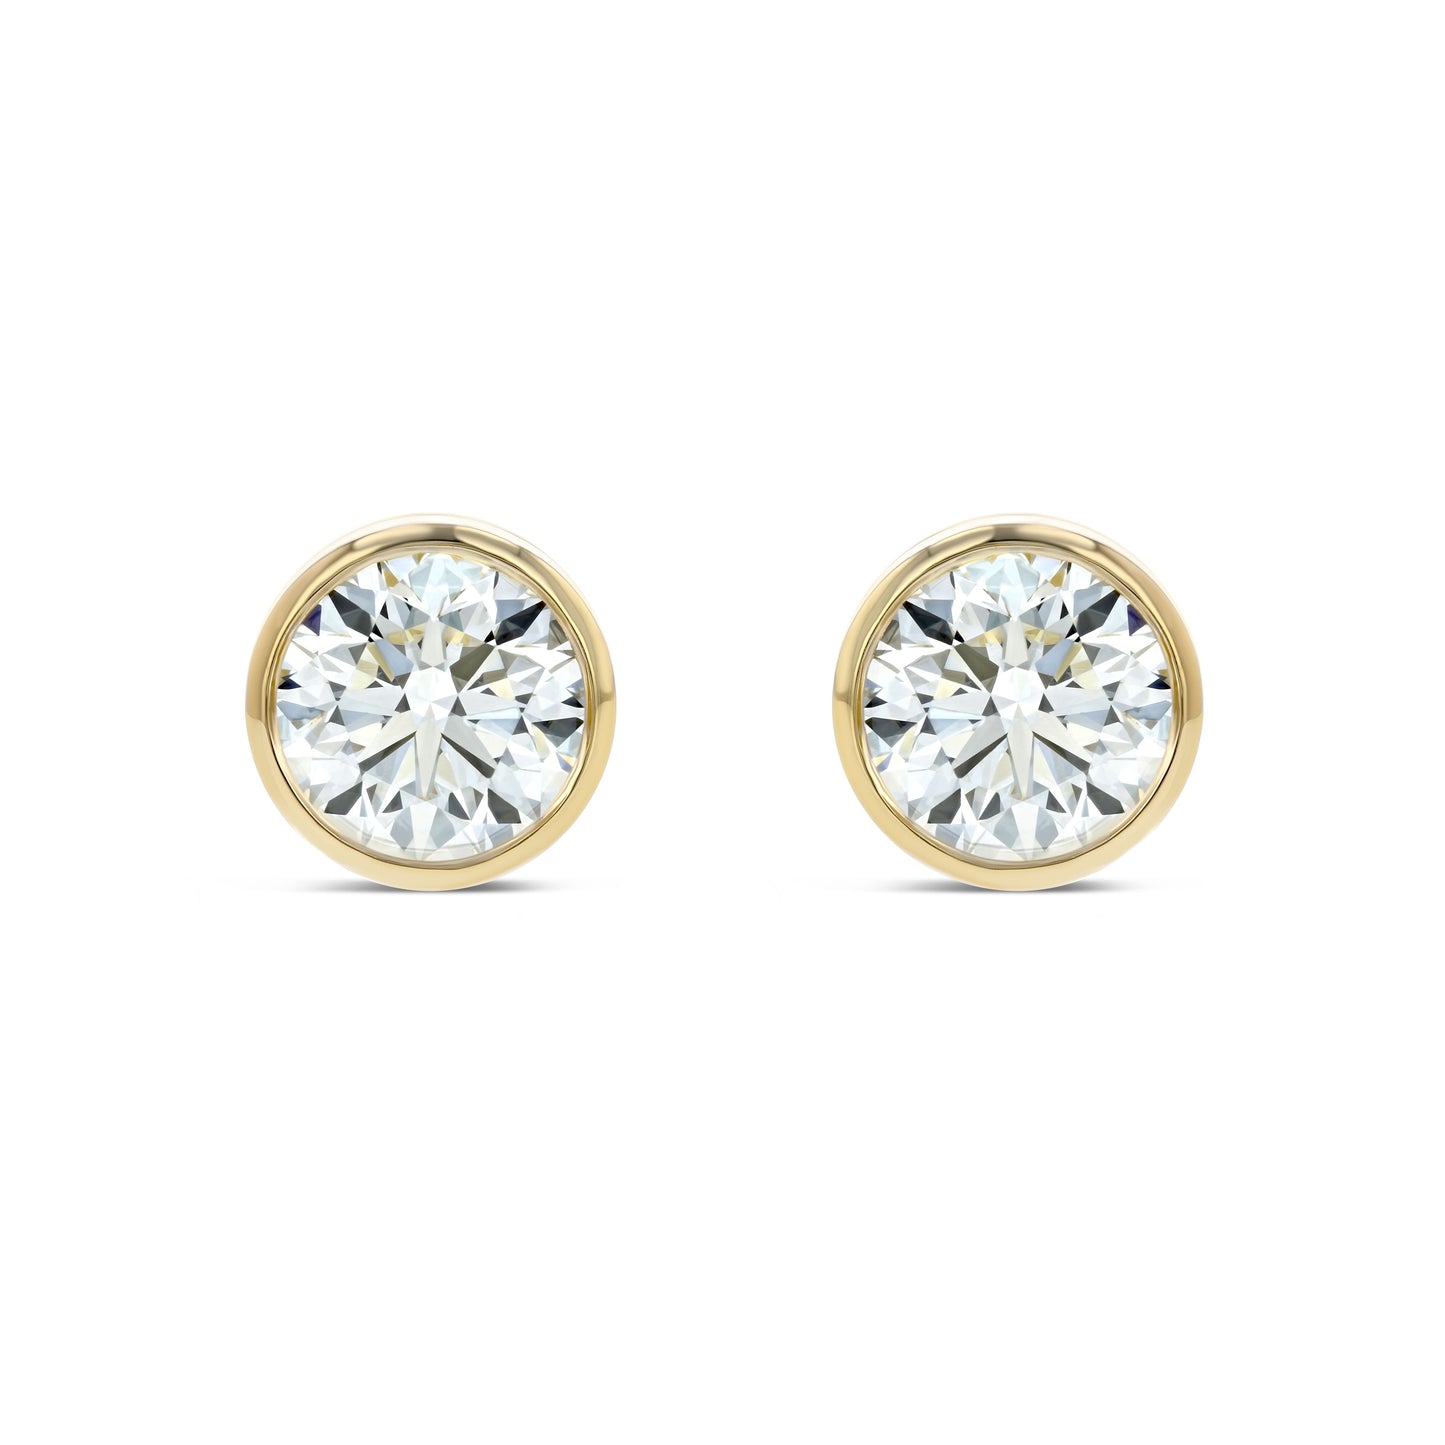 14k Yellow Gold Bezel Round Diamond Stud Earrings 1ctw (5.2mm Ea), G Color, Si3 Clarity